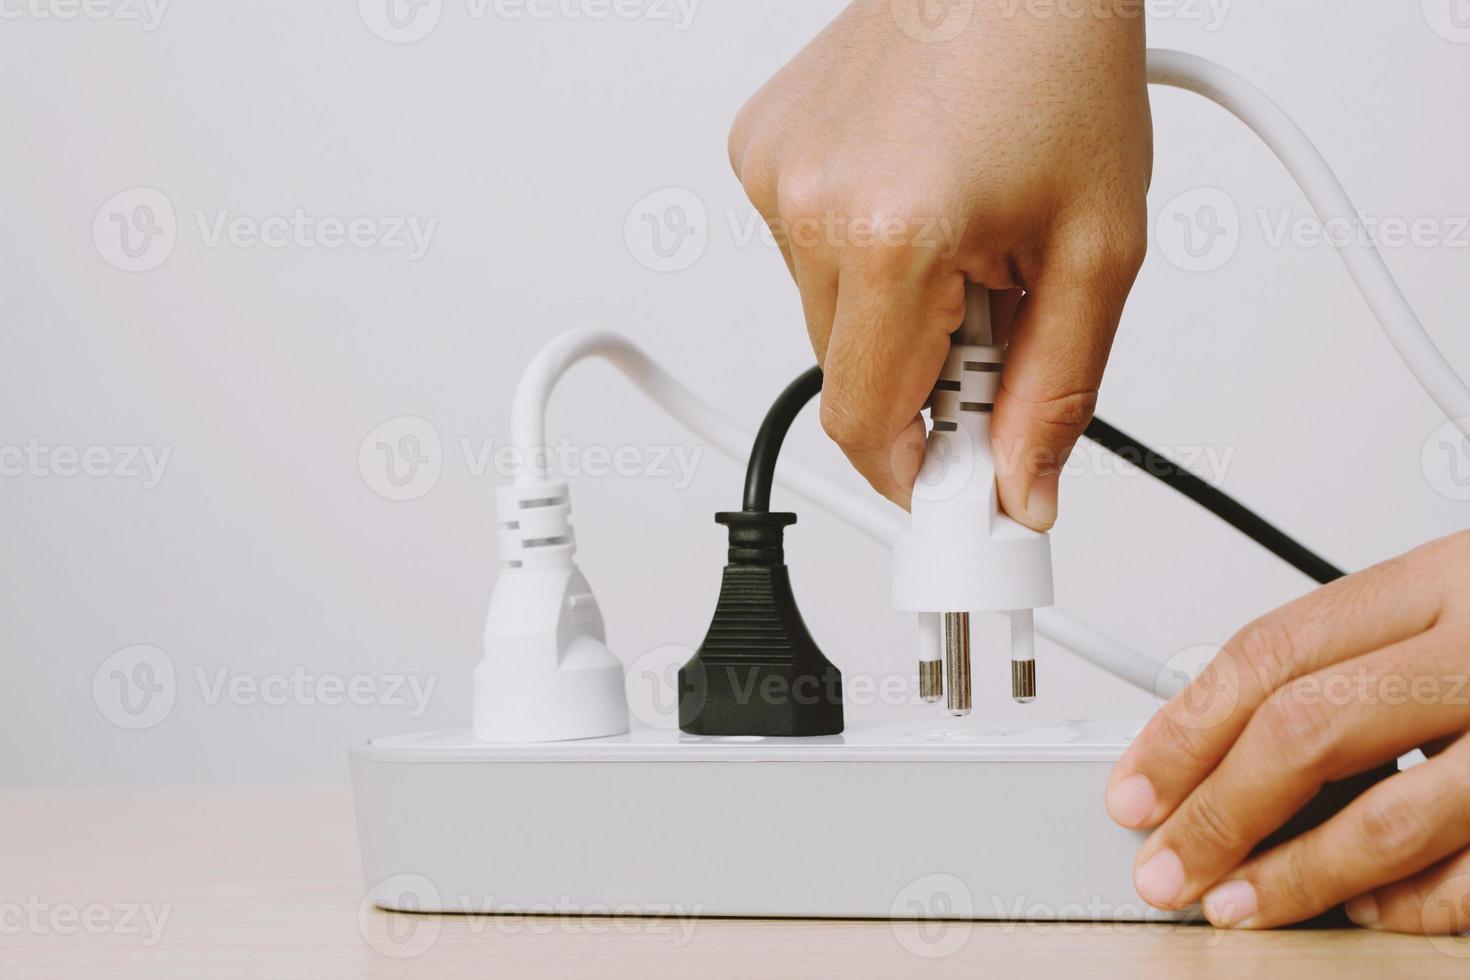 Electrical appliances plugs full of all plugs or plugs together. Because of the risk of causing a short circuit from high heat accumulated in the wires. photo